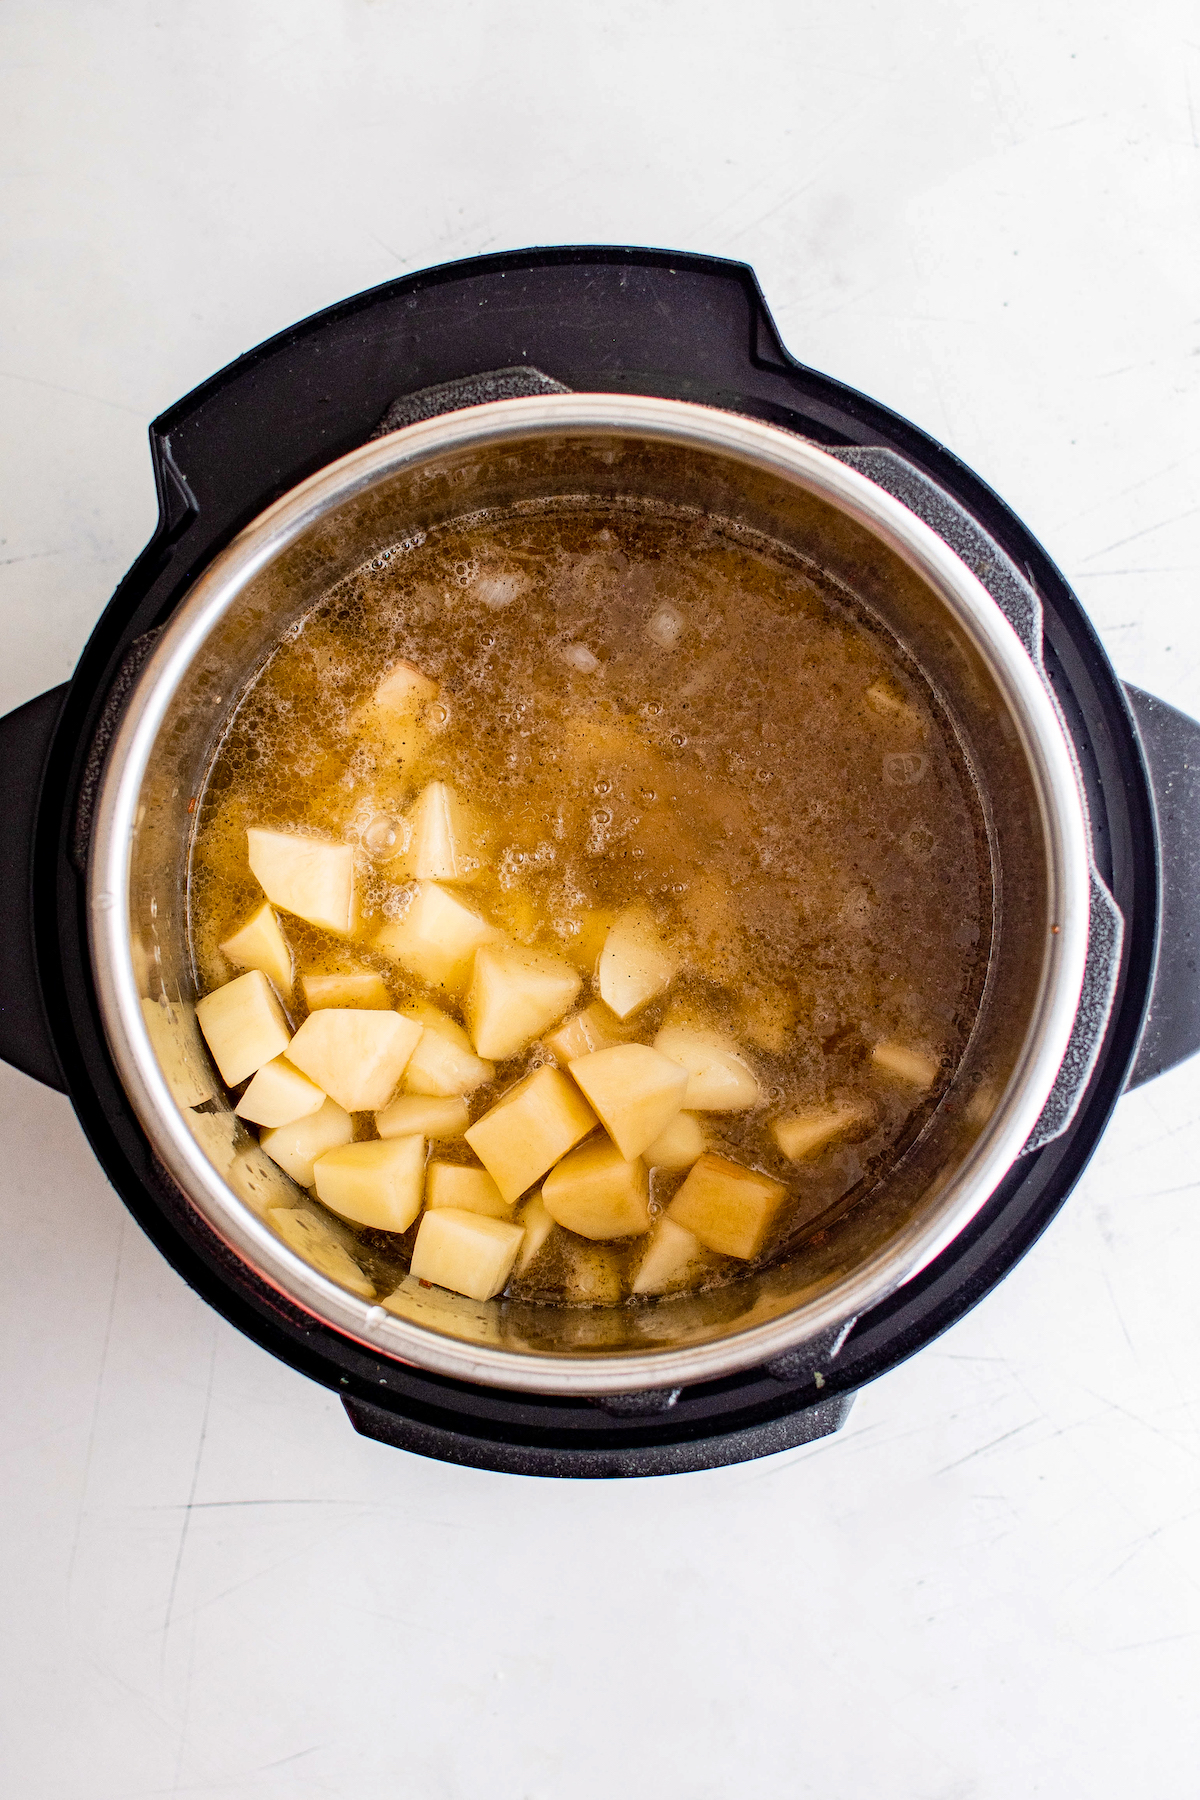 Potatoes, broth, and other soup ingredients in an electric pressure cooker.